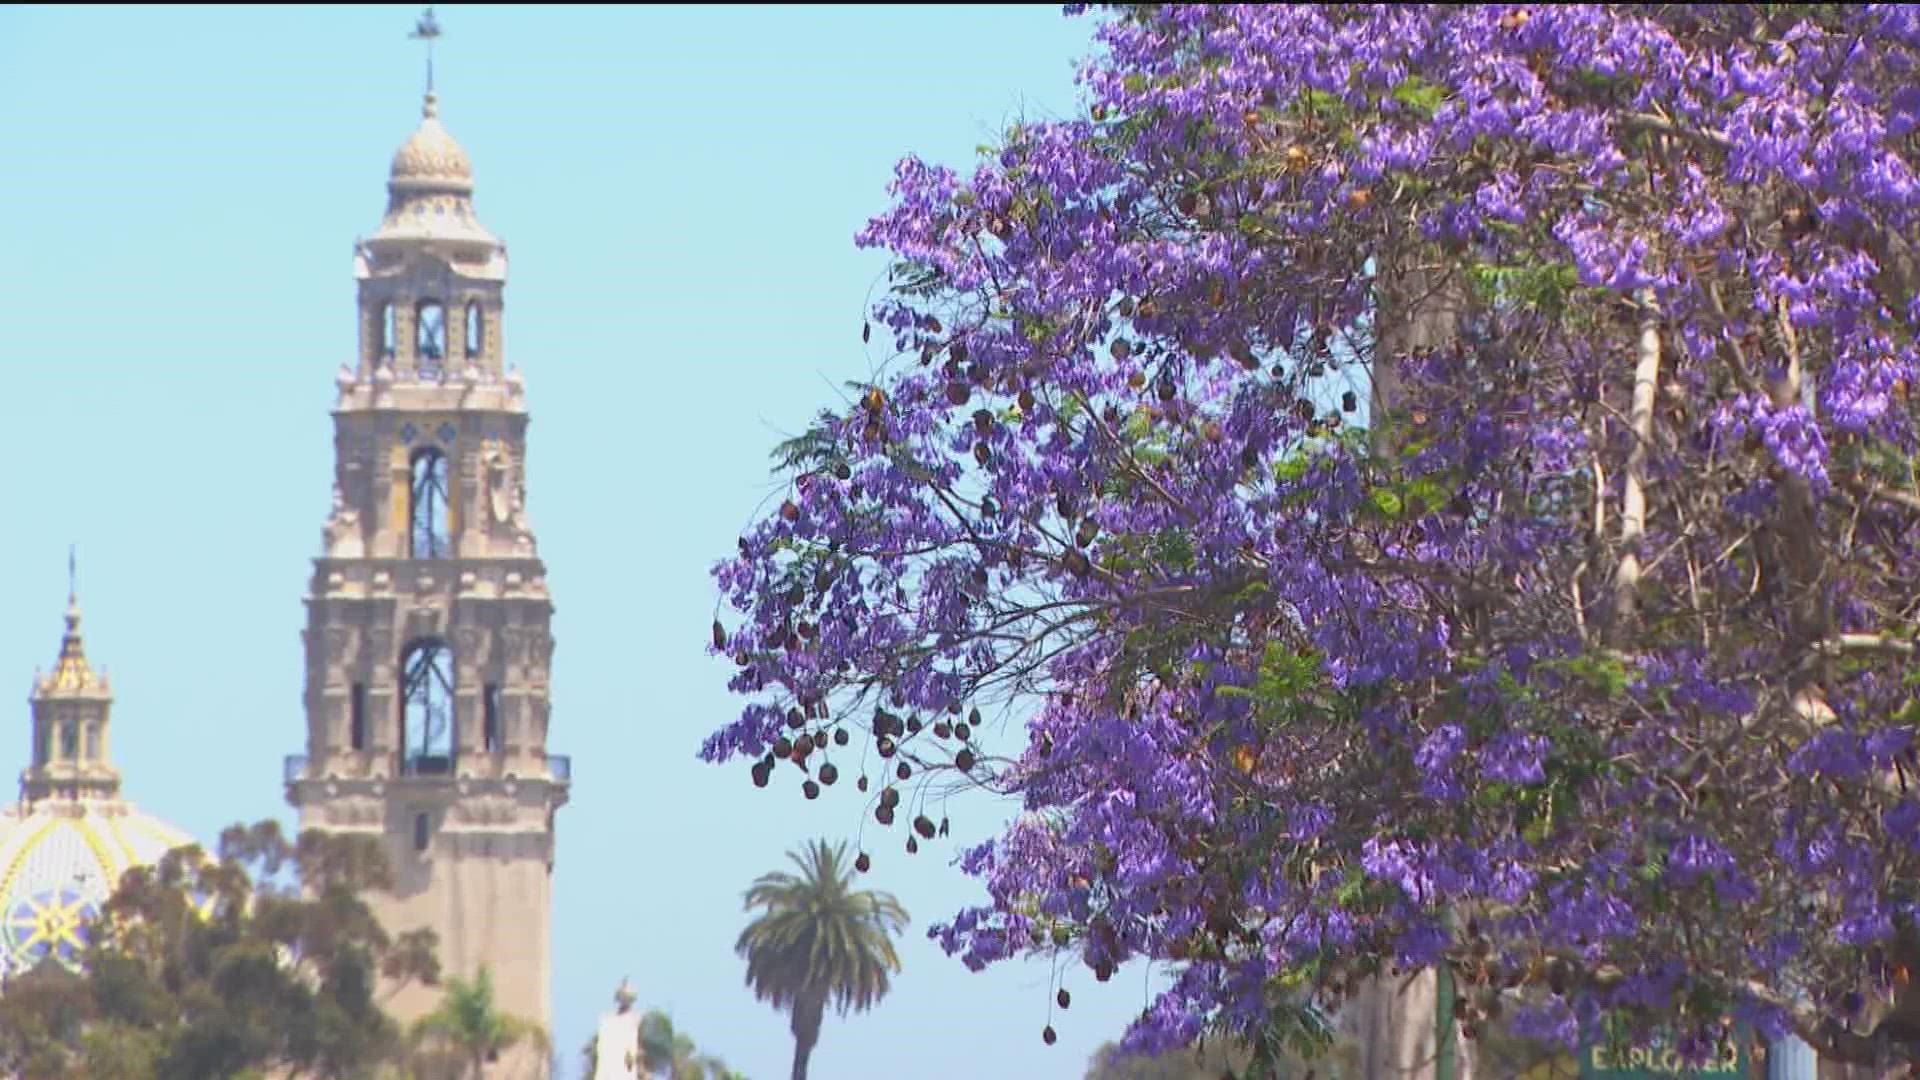 Jacarandas are native to South American countries like Brazil and Argentina and they’ve been in San Diego at least as far back as the 1890’s.